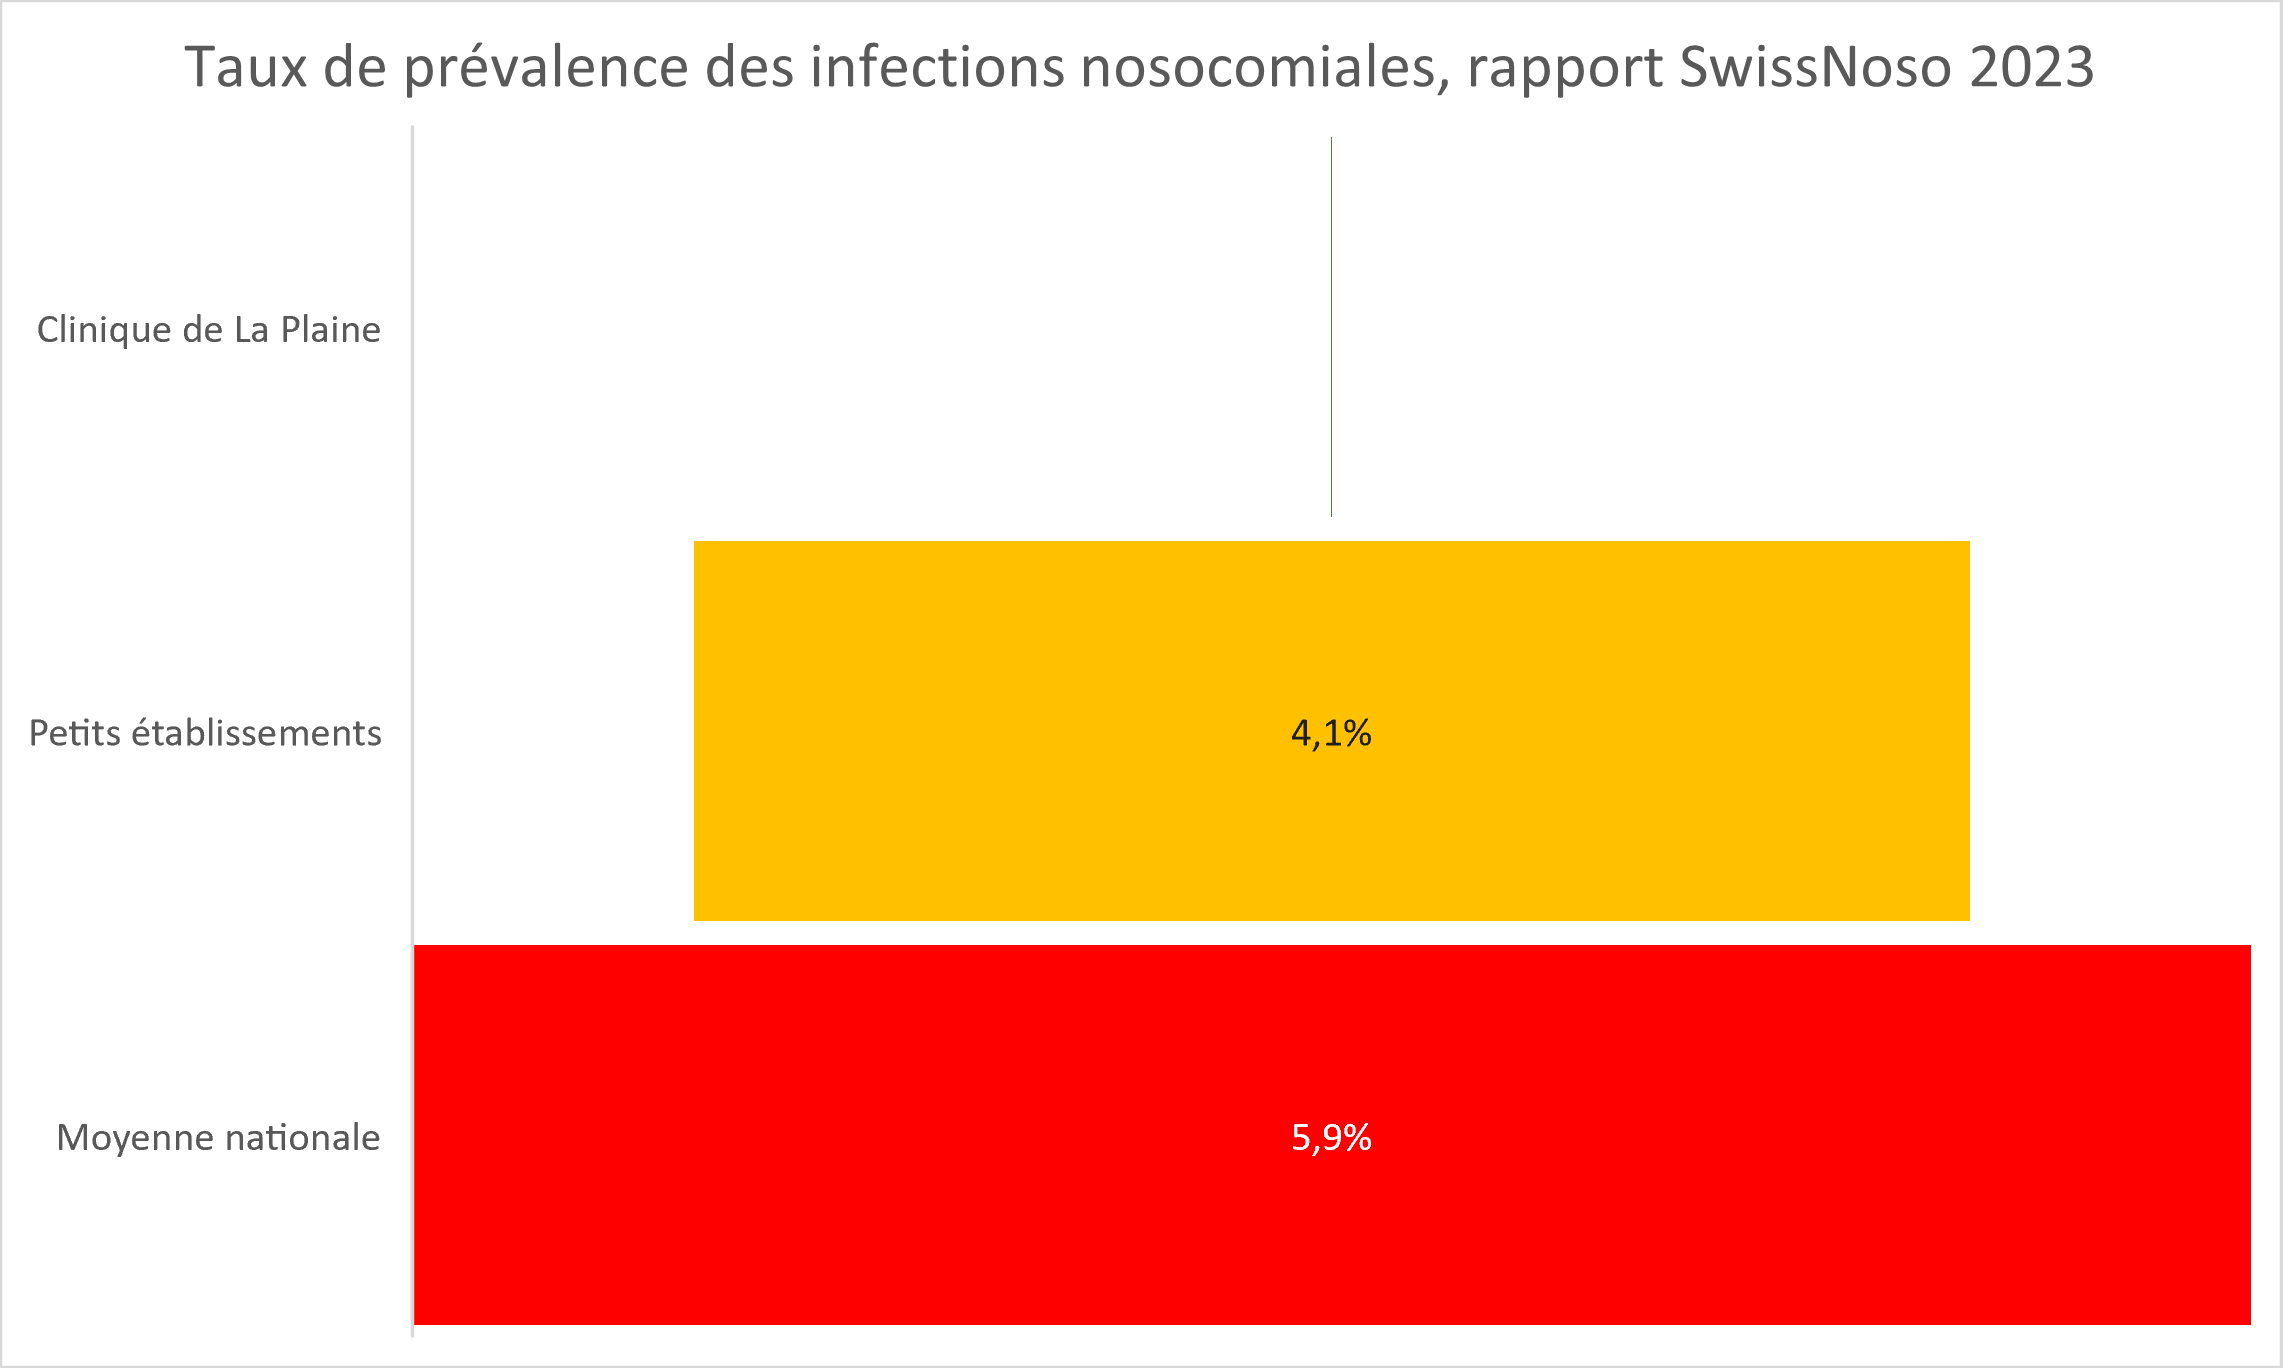 Taux prevalence infections nosocomiales rapport SwissNoso 2023